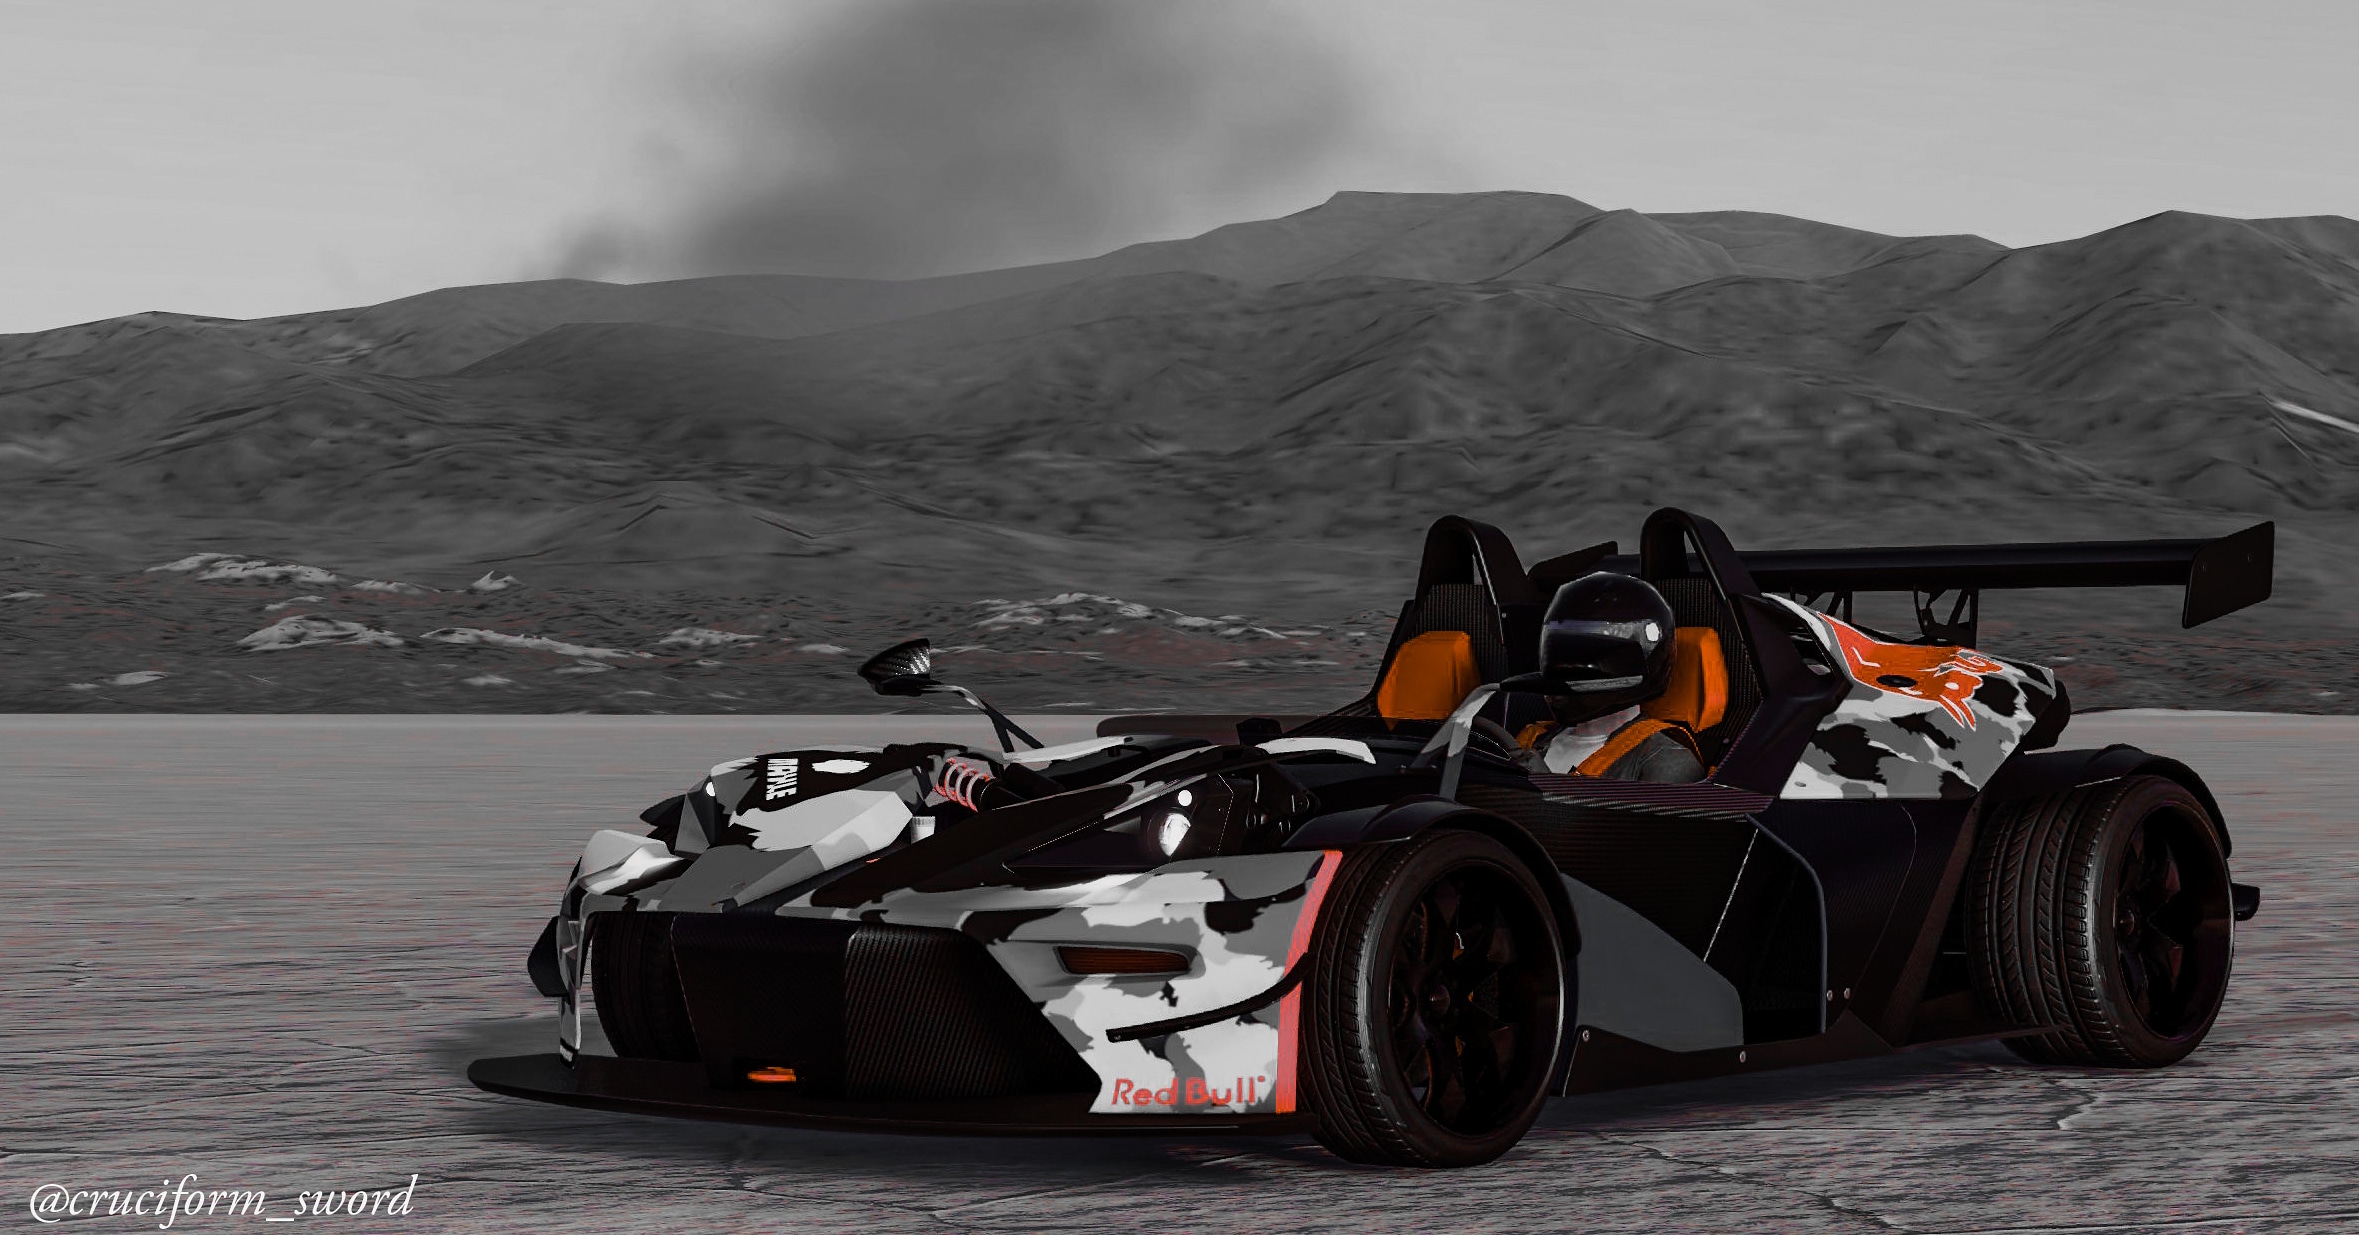 General 2359x1235 The Crew 2 KTM X-Bow vehicle screen shot Games posters video games photography monochrome selective coloring KTM British cars Ubisoft